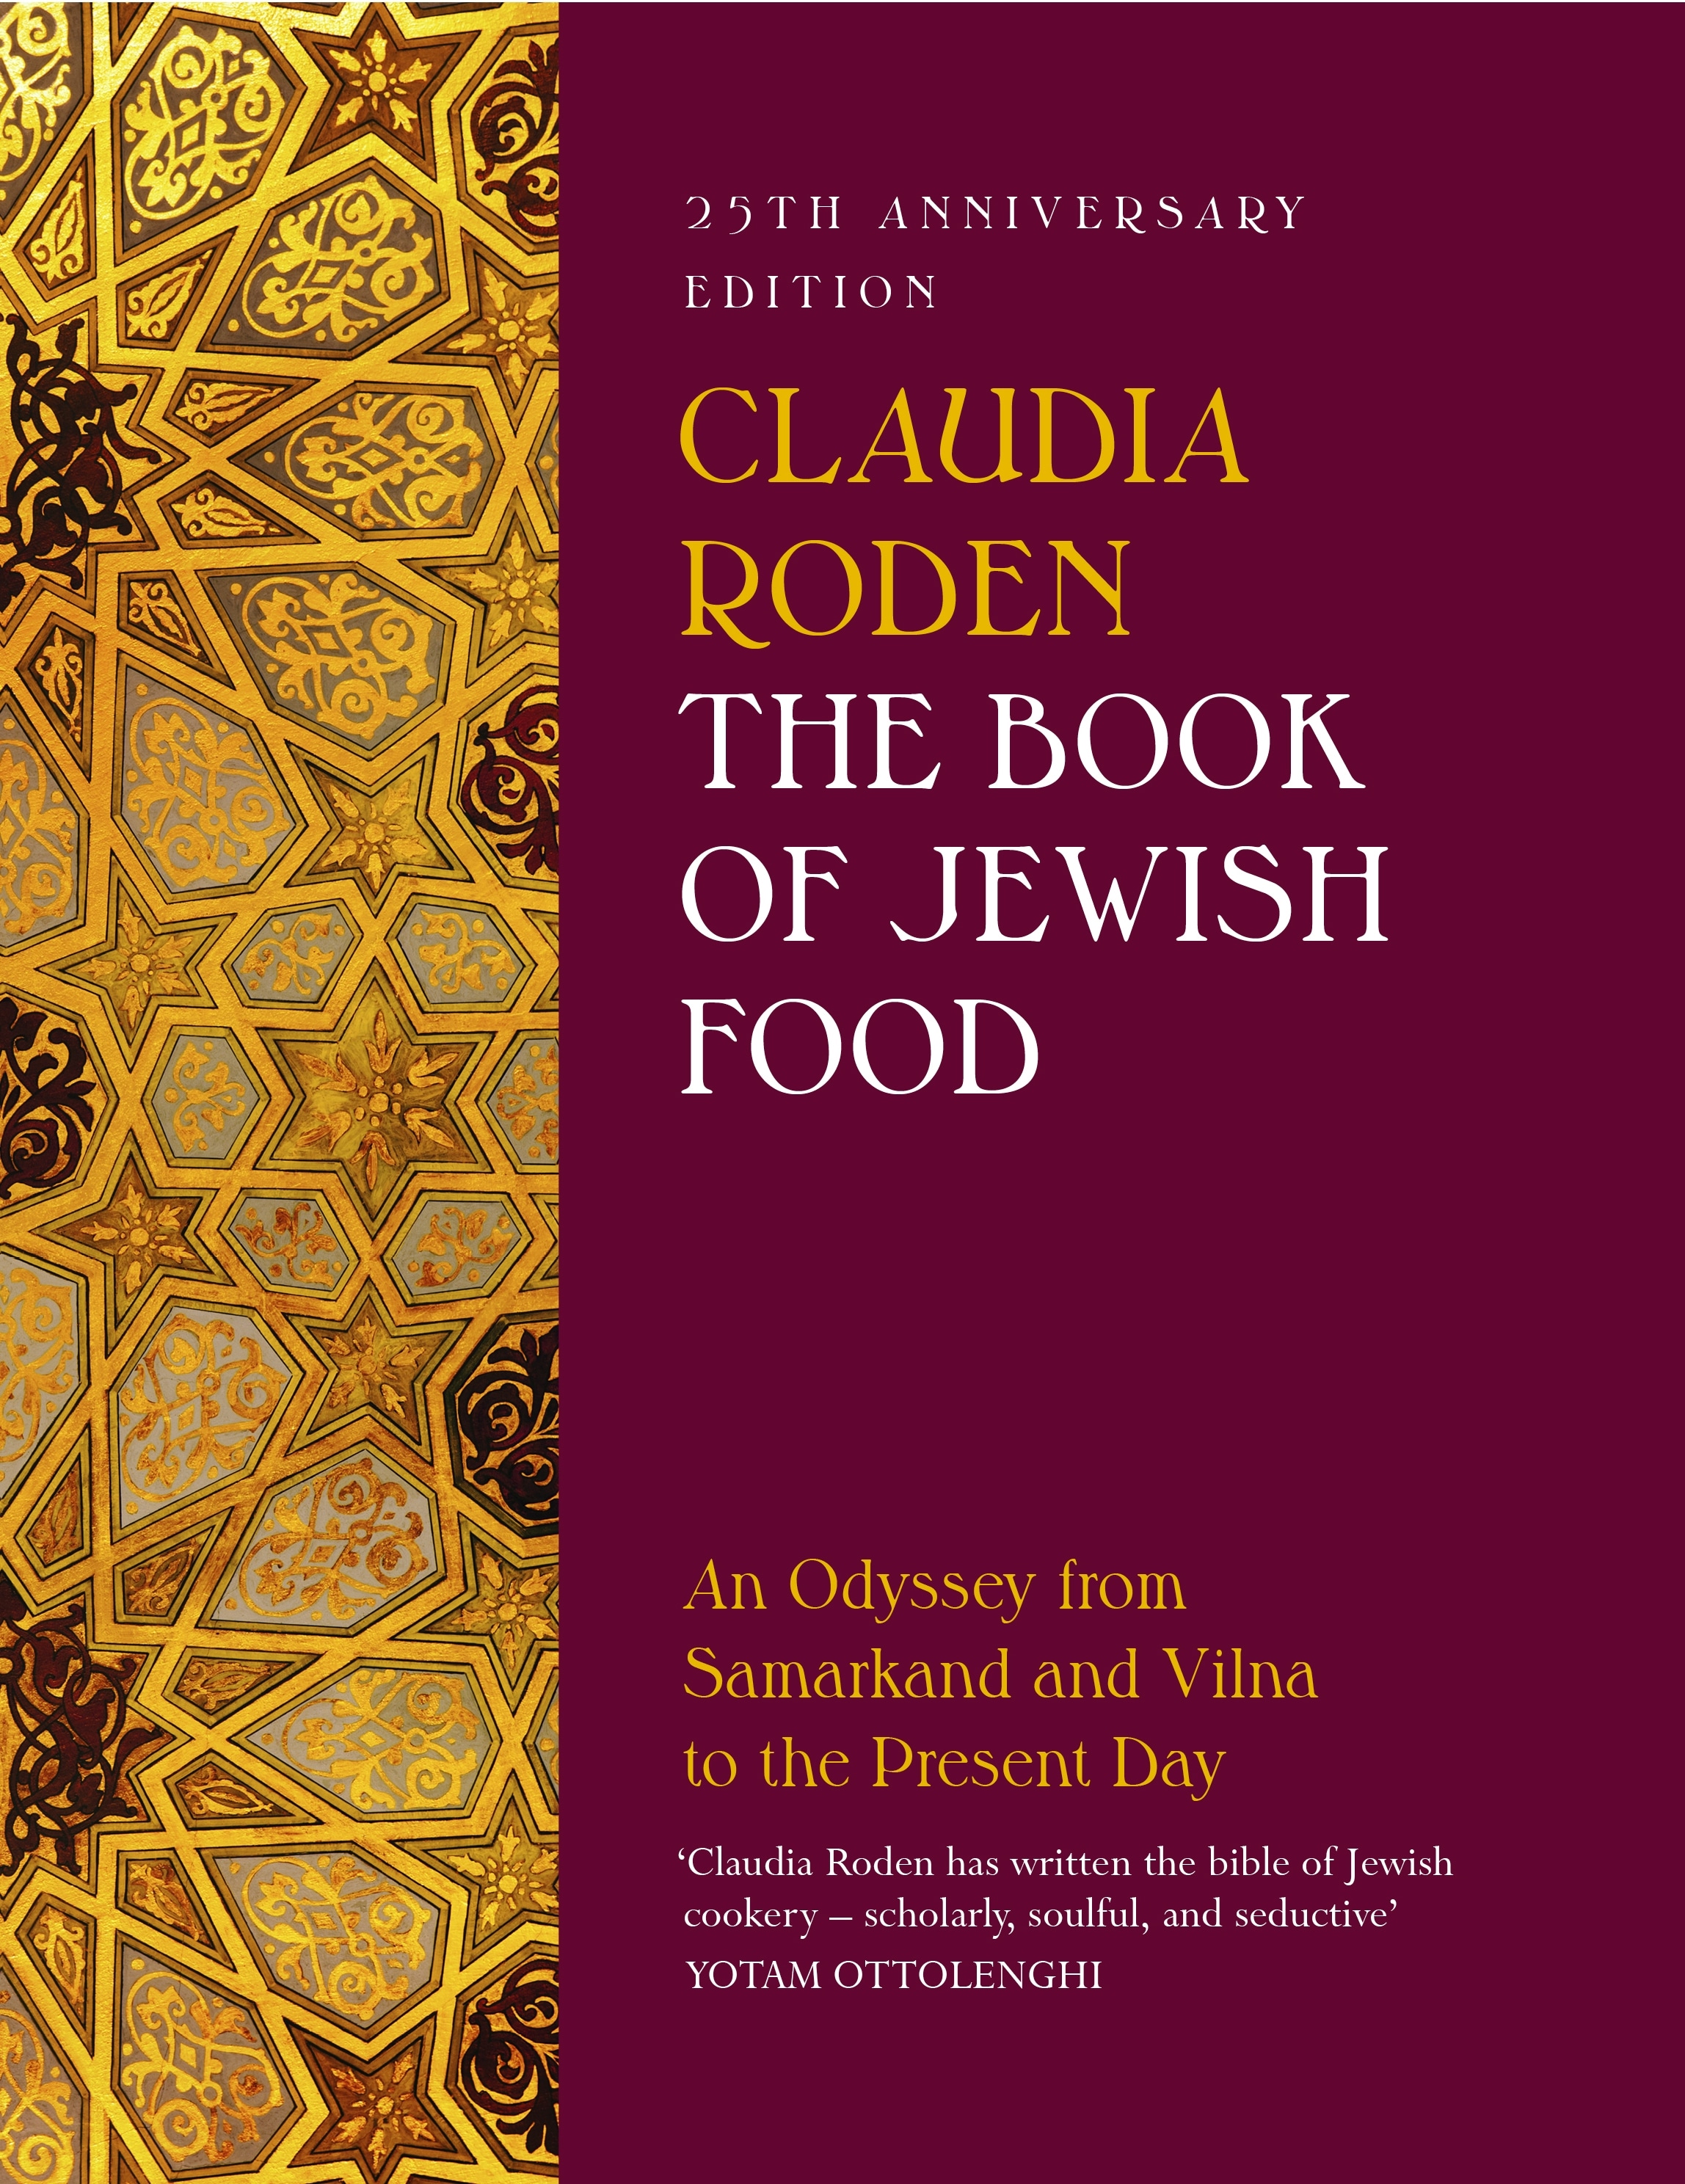 Book “The Book of Jewish Food” by Claudia Roden — May 26, 2022